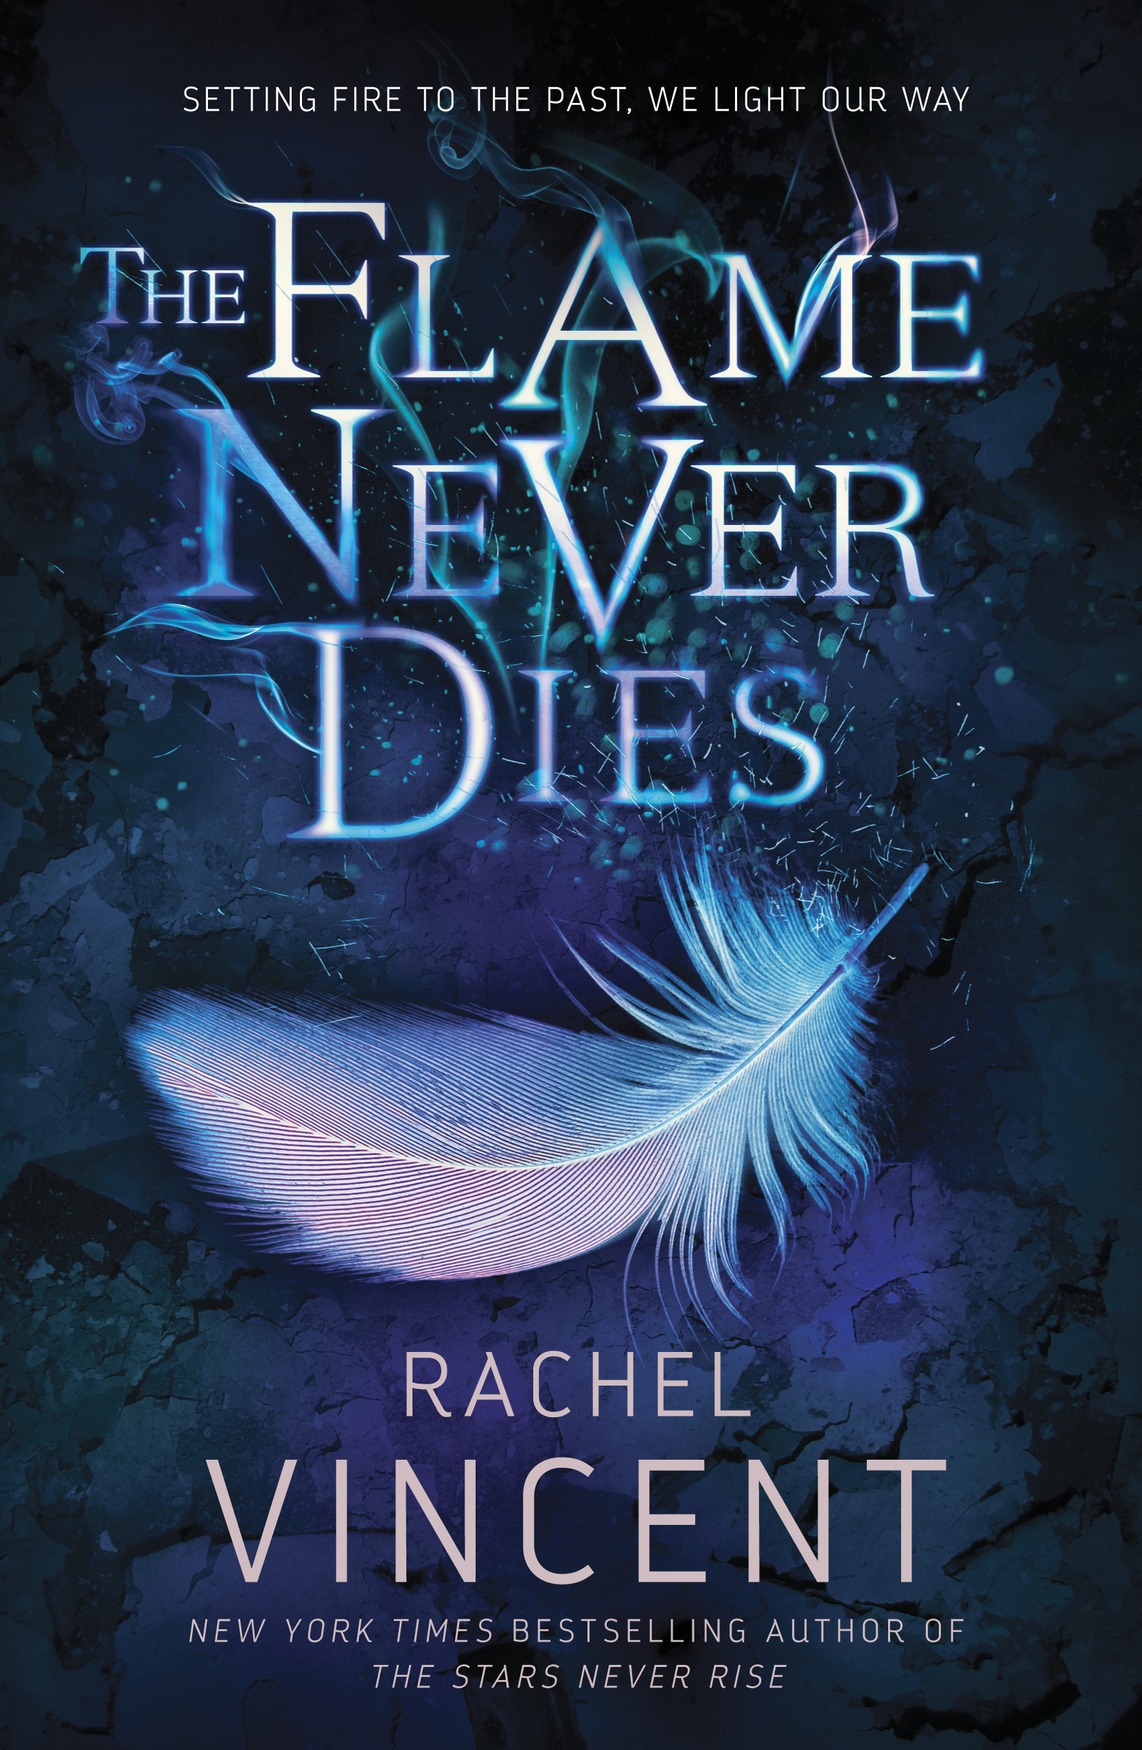 The Flame Never Dies (2016) by Rachel Vincent